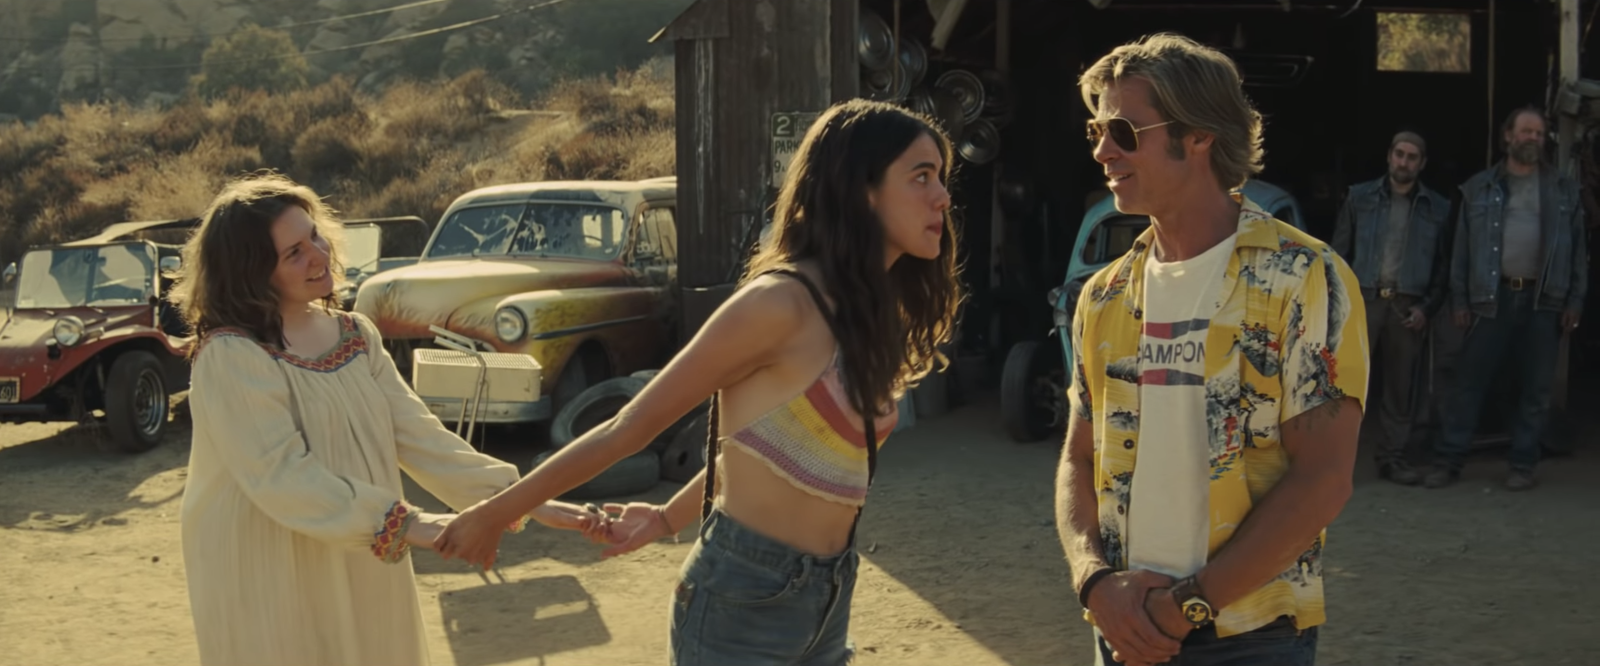 once upon a time in hollywood scene 03